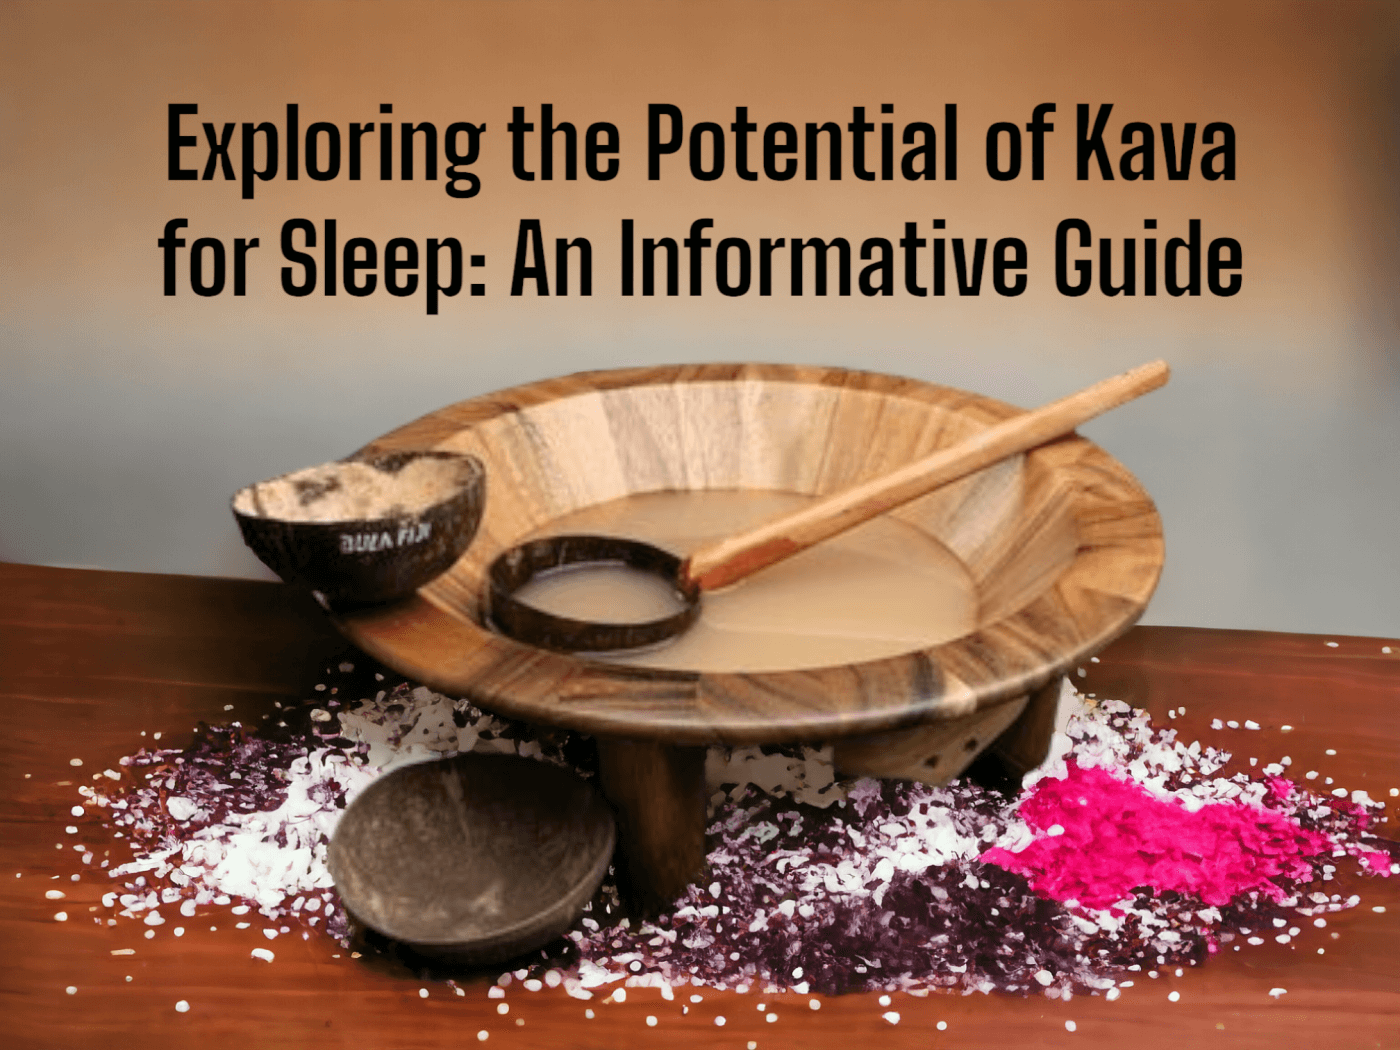 Exploring the Potential of Kava for Sleep: An Informative Guide